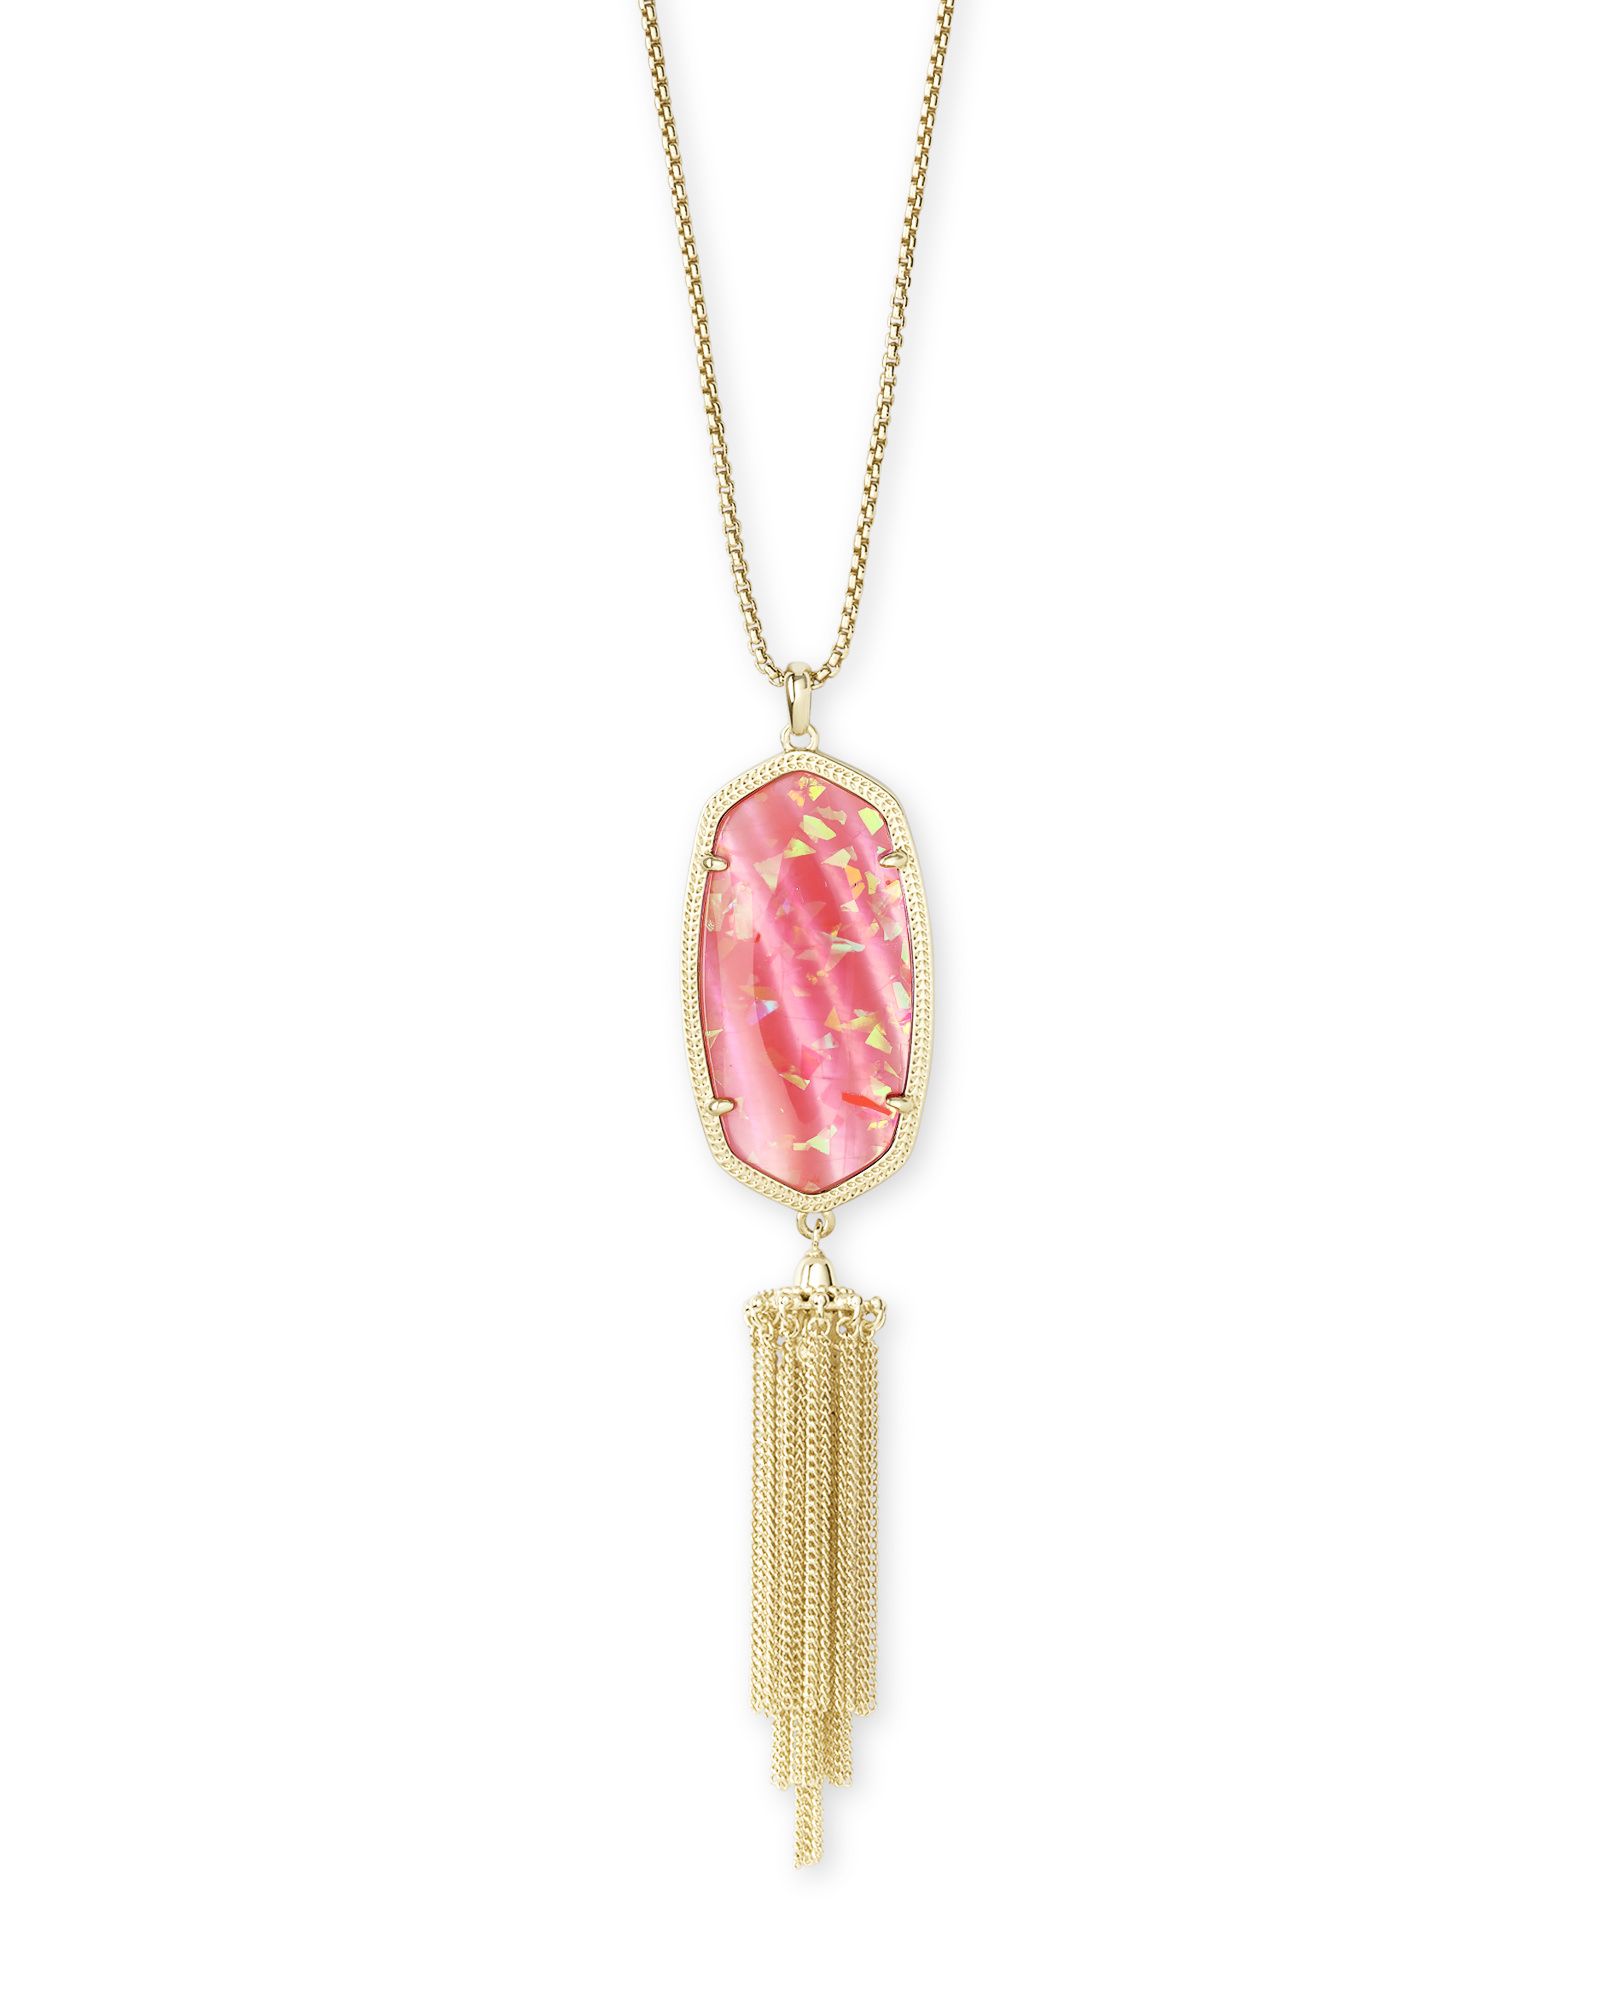 Rayne Gold Long Pendant Necklace in Iridescent Coral Illusion | Kendra Scott